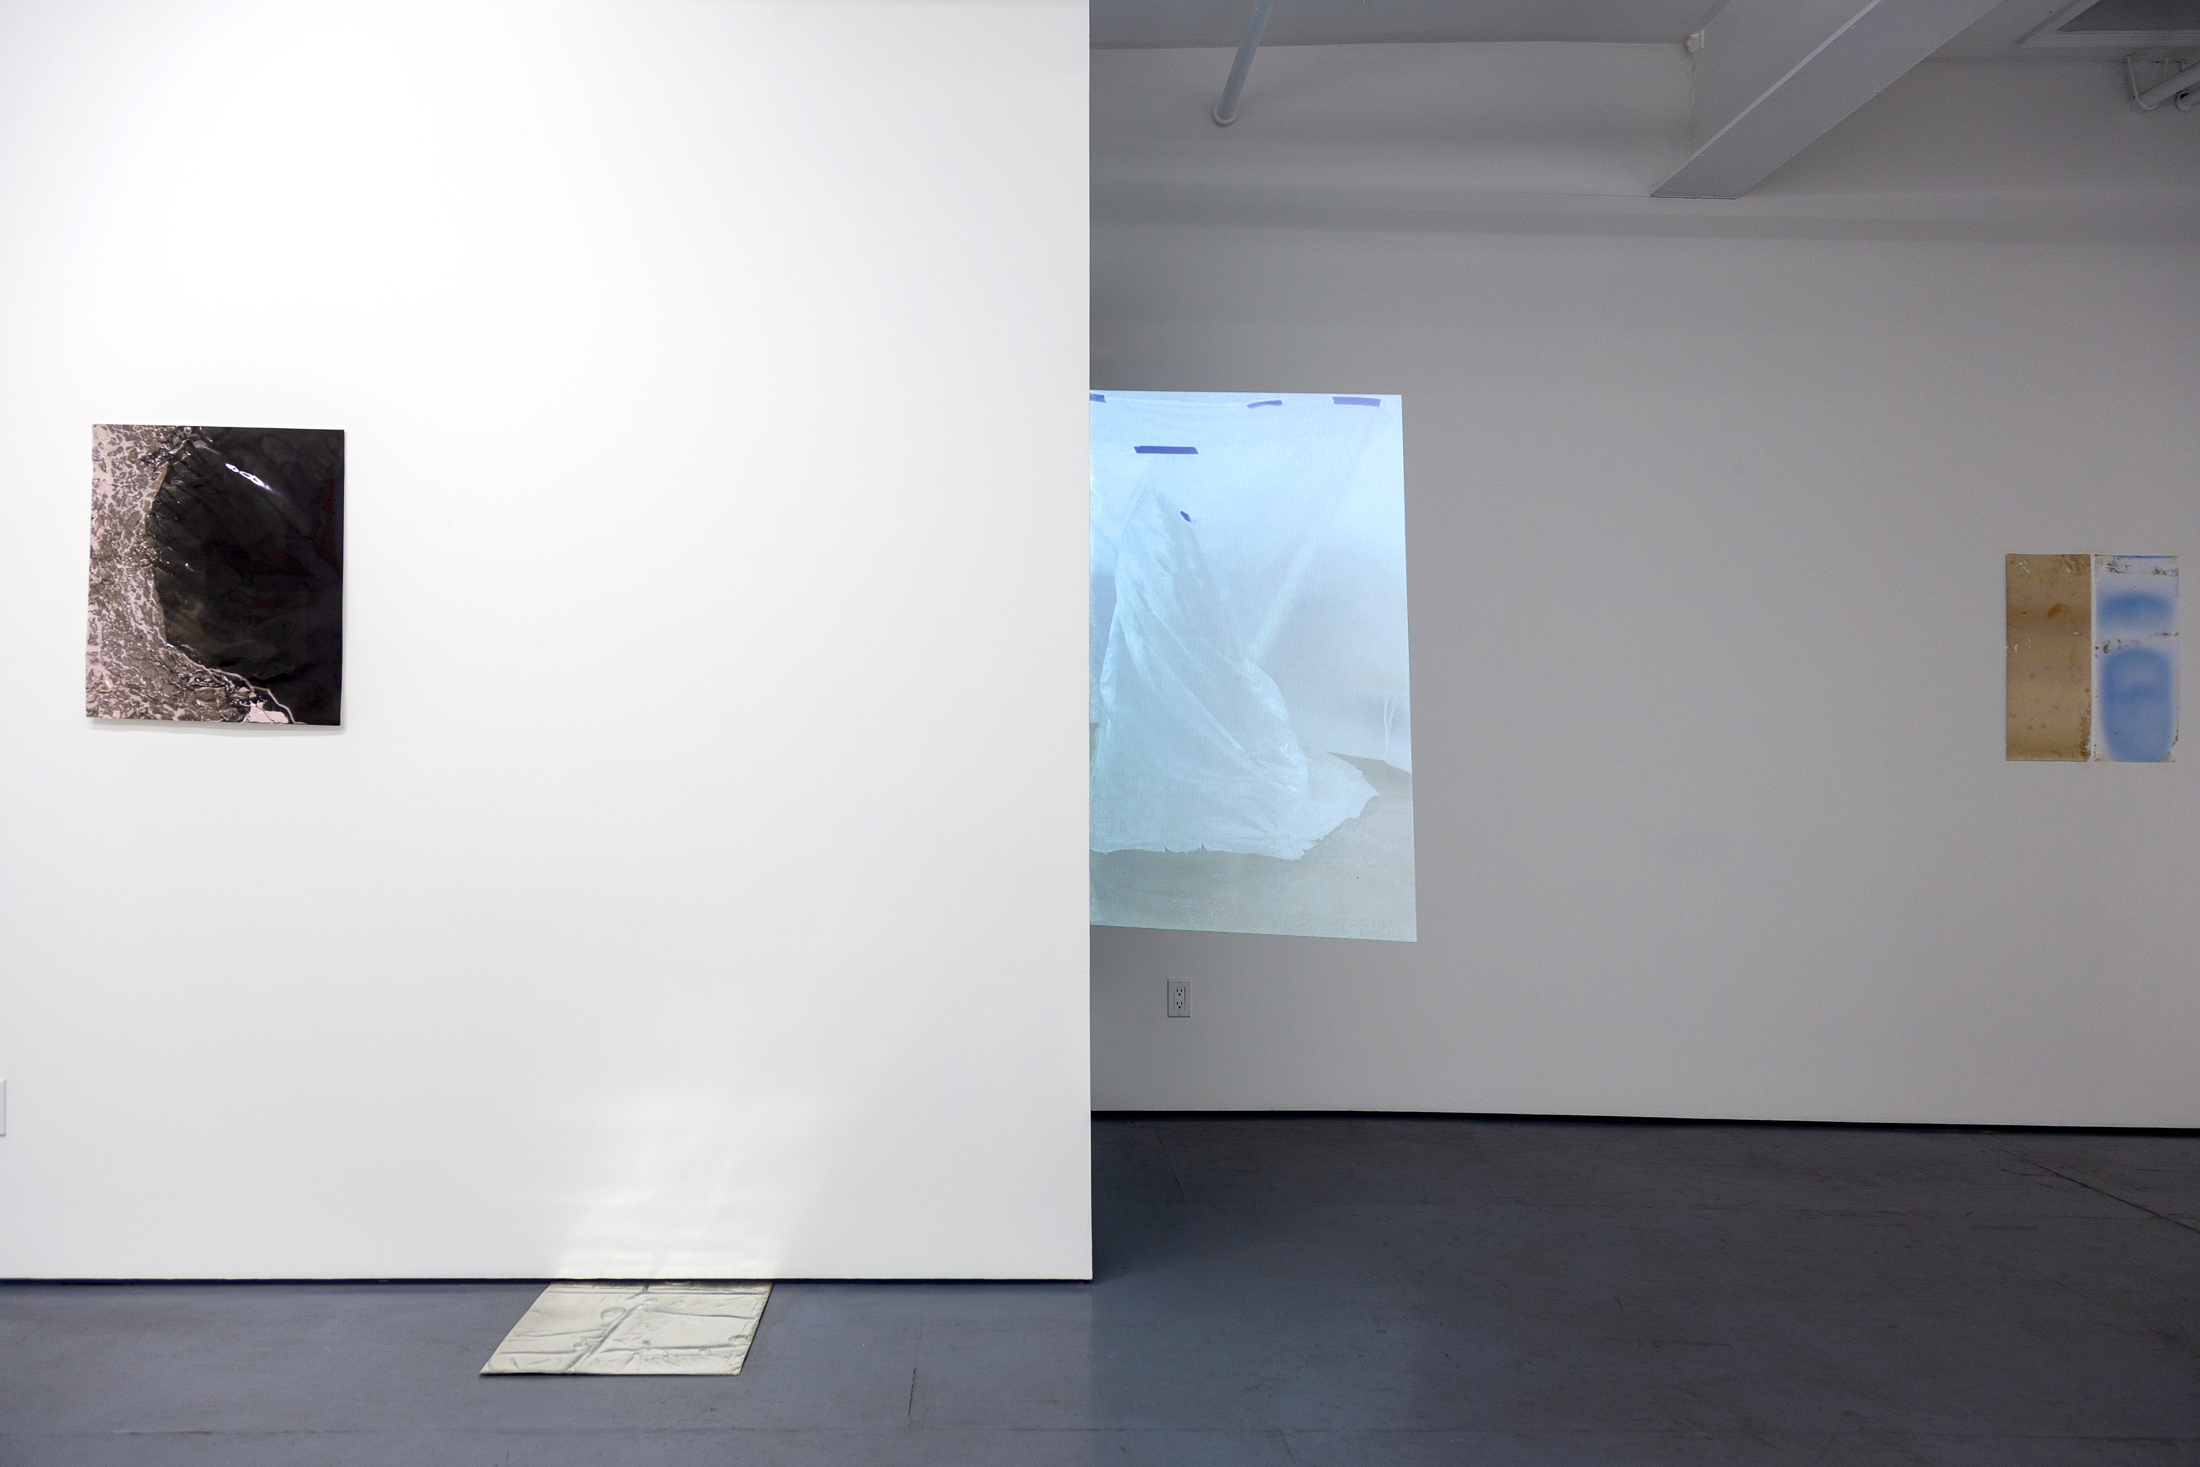  Installation view of Joy Episalla and Carrie Yamaoka at Transmitter 